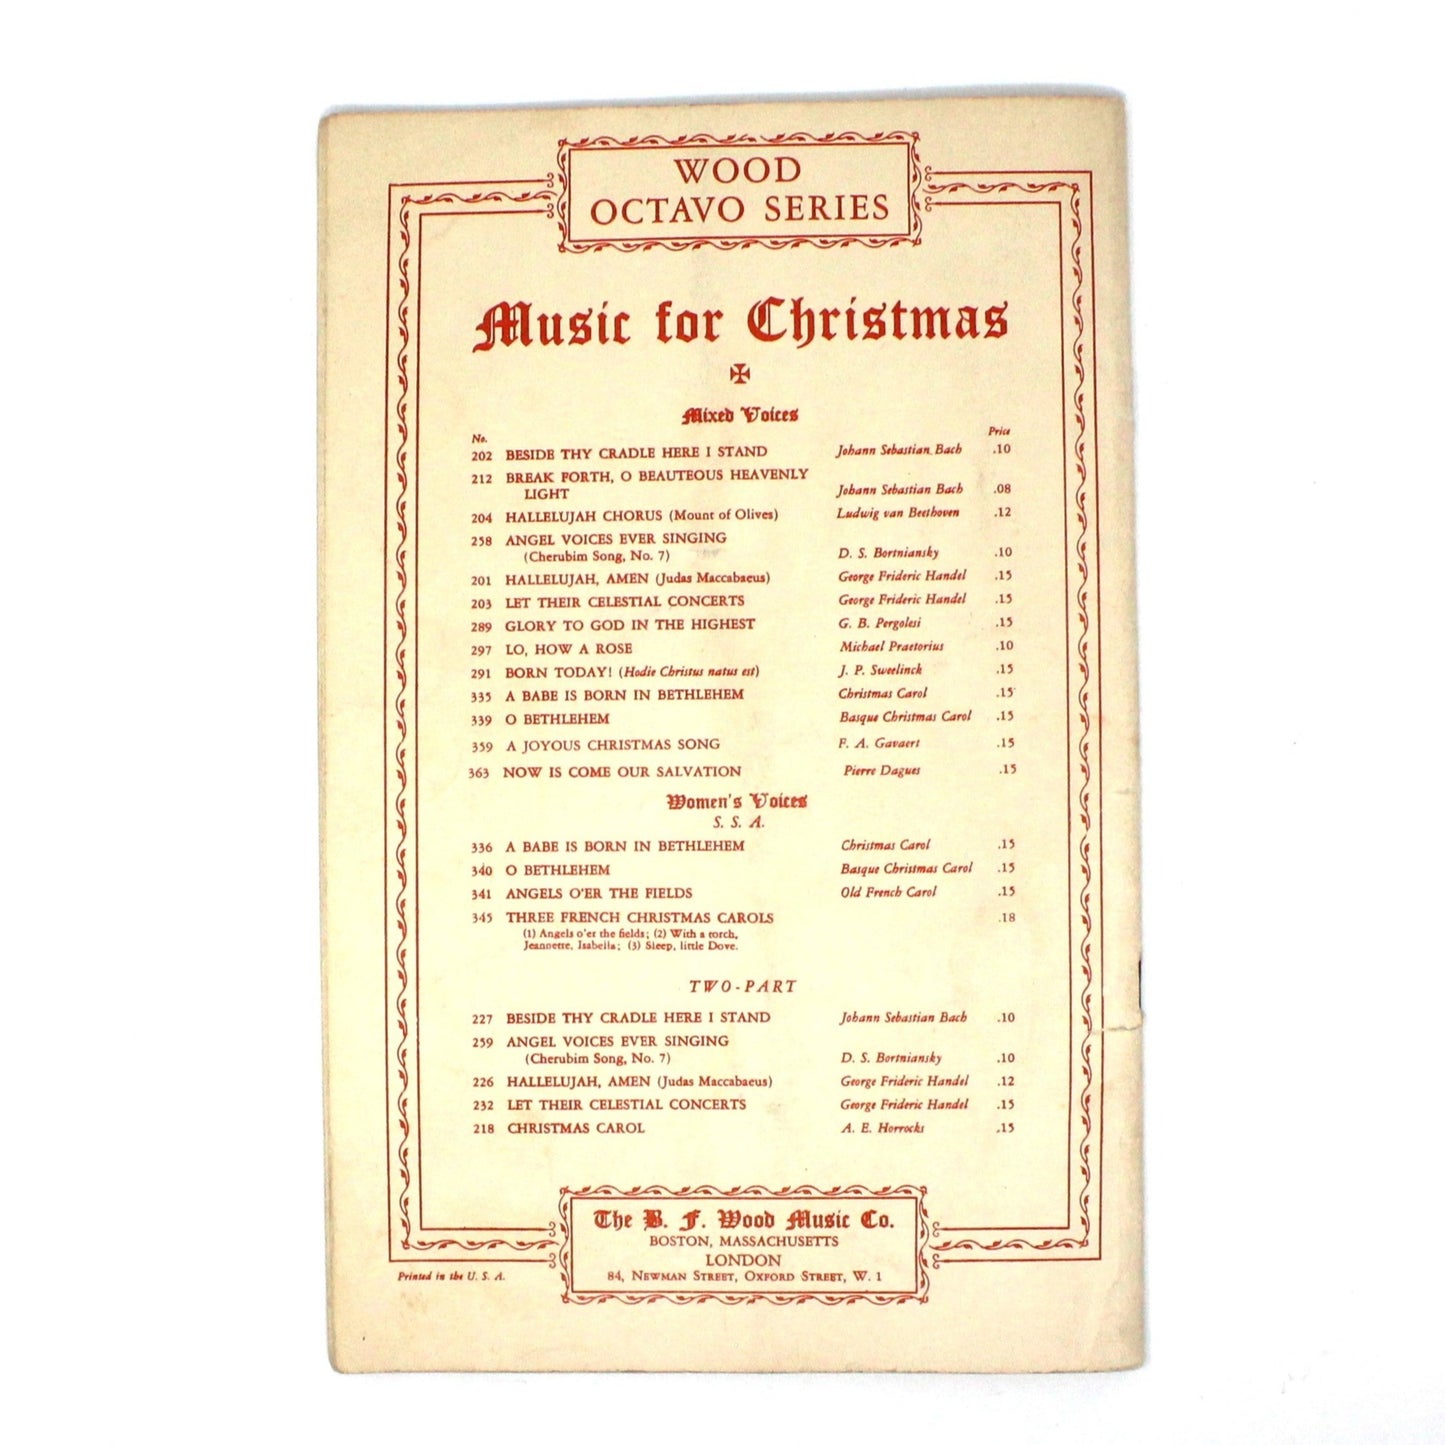 Songbook / Lead Sheet, The Wood Collection of Christmas Carols, Vintage